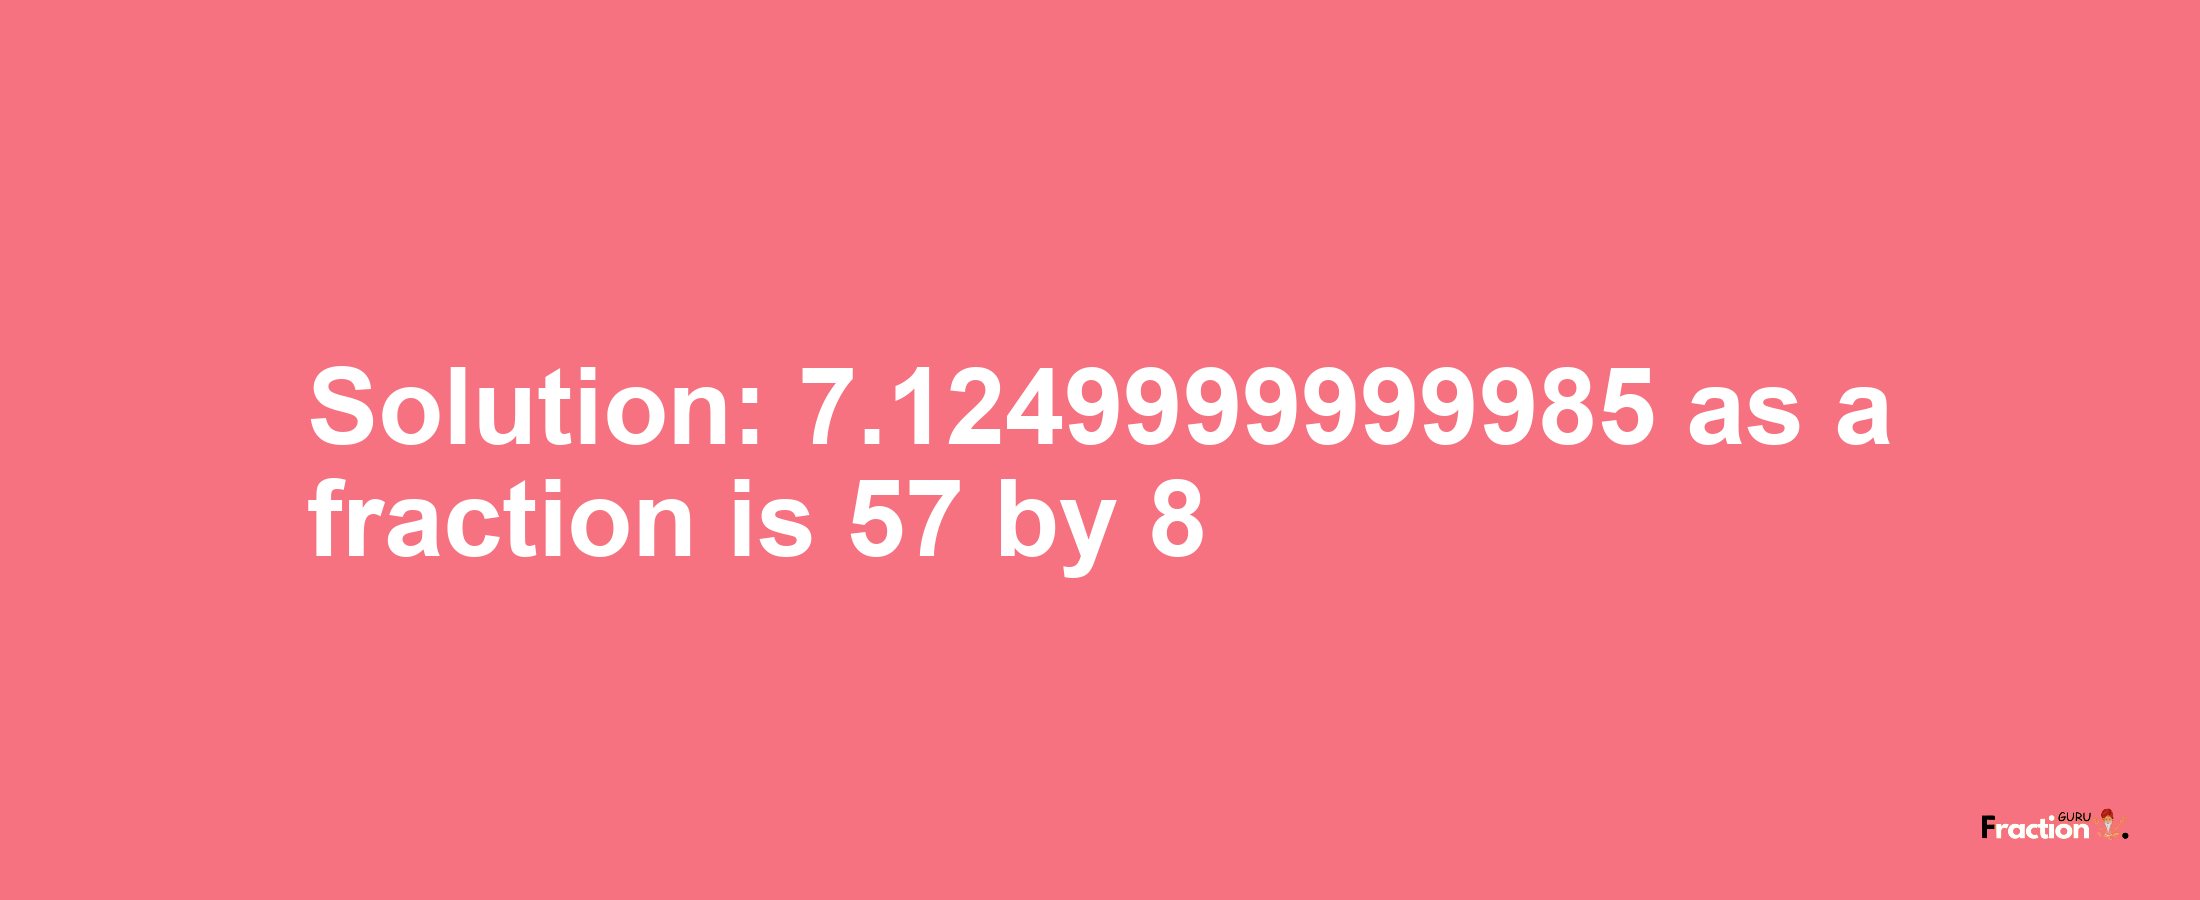 Solution:7.1249999999985 as a fraction is 57/8